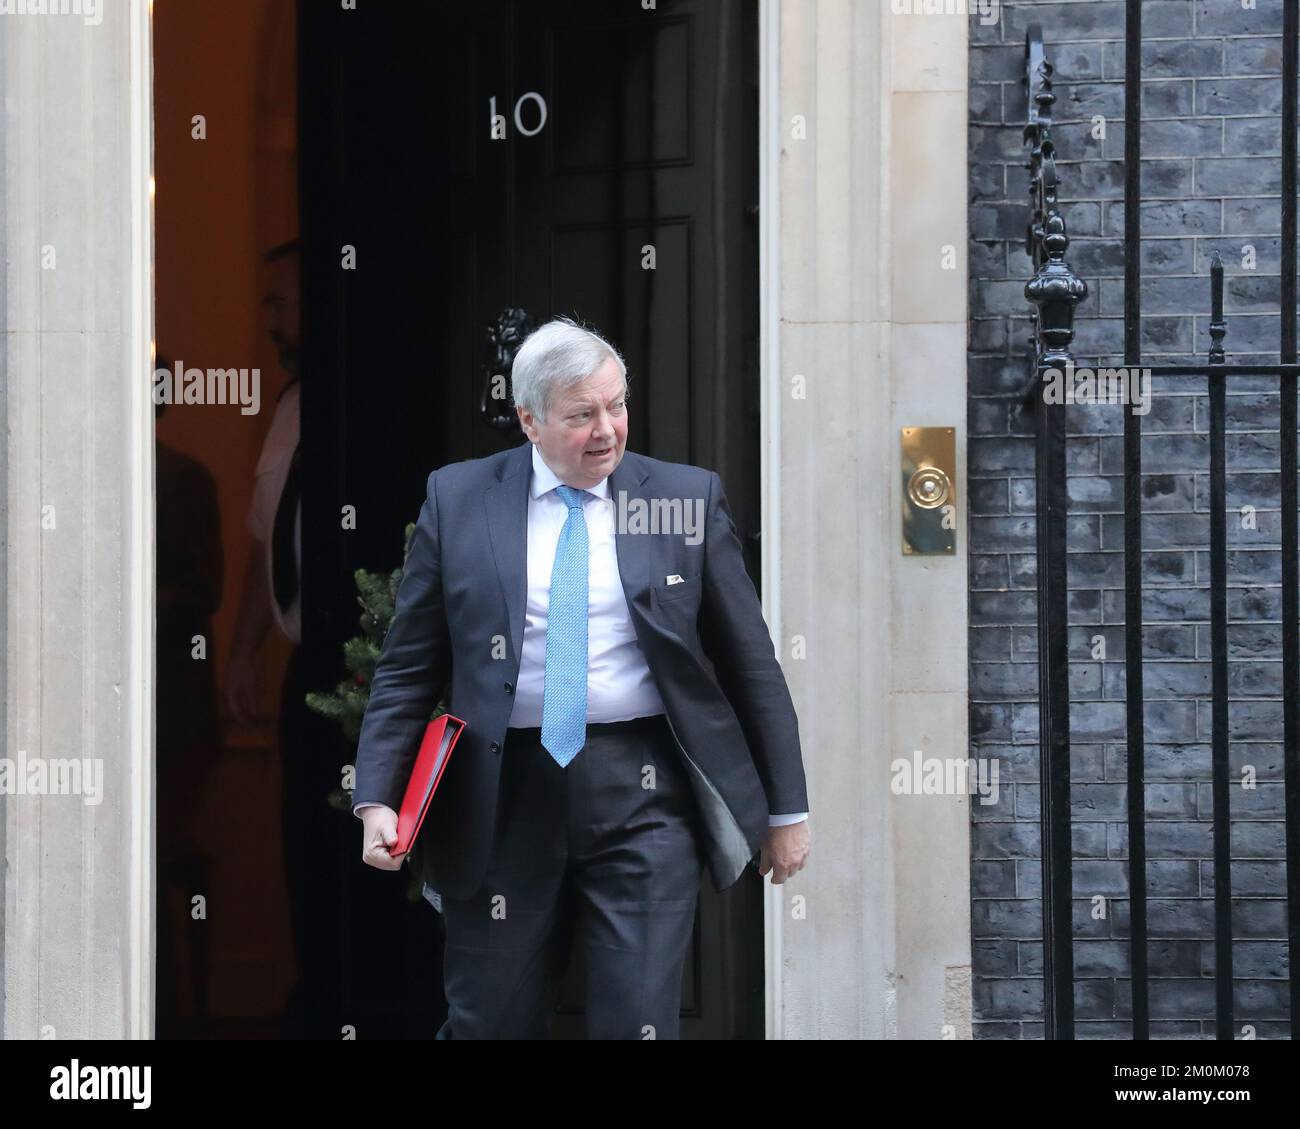 Downing Street, London, UK. 6th Dec, 2022. Leader of the House of Lords Lord True leaves after the weekly Cabinet Meeting at No 10 Downing Street. Stock Photo